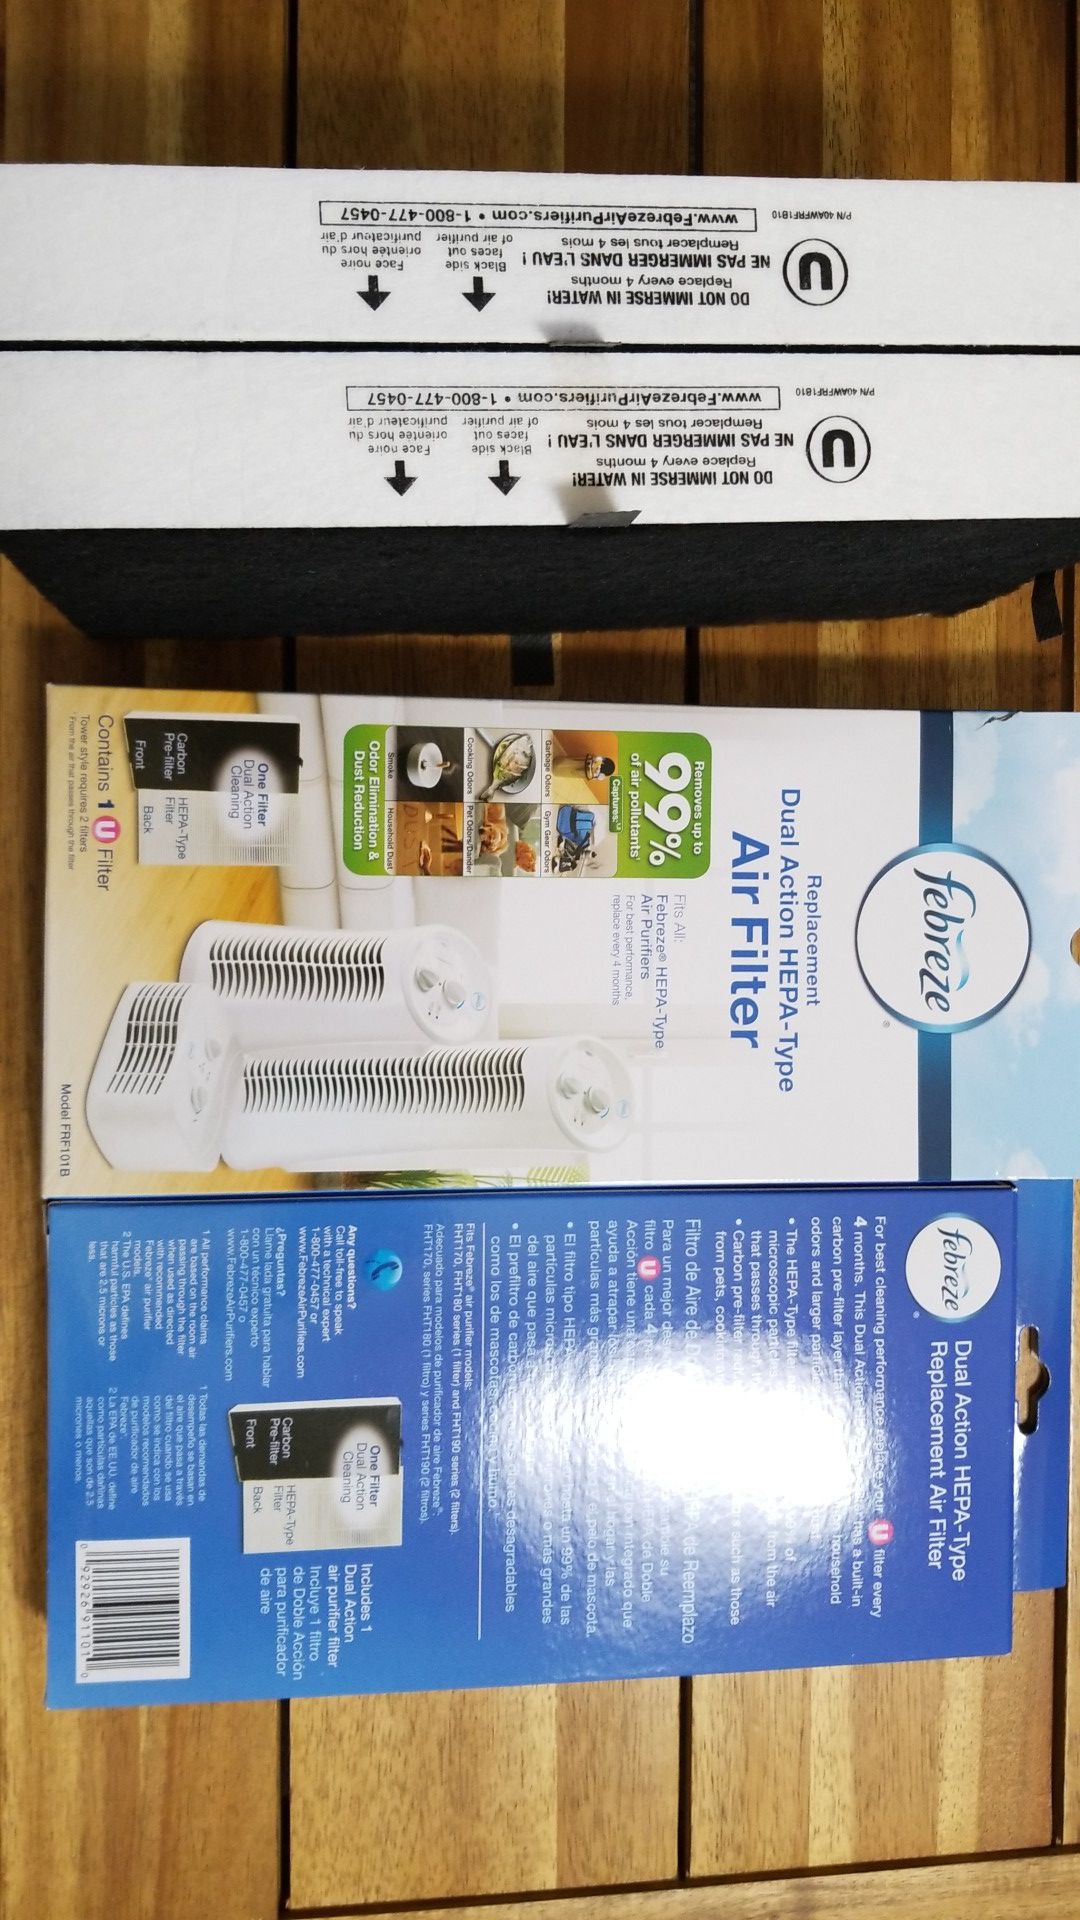 Febreze Replacement Dual Action HEPA Type Air Filter Model FRF101B Brand new - 4 Filters Included